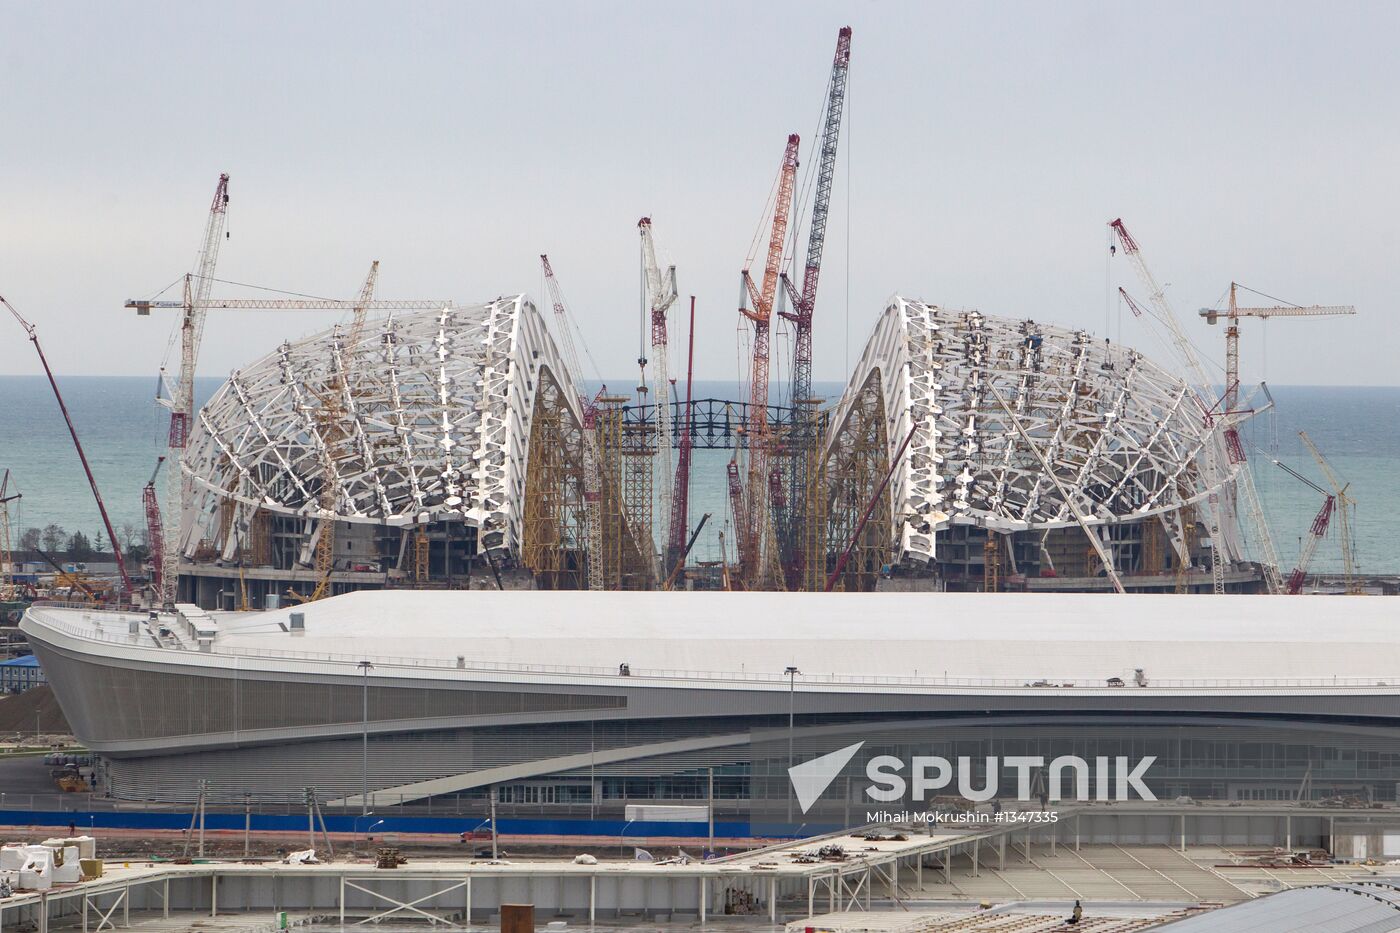 Olympic facilities under construction in Imereti Valley, Sochi